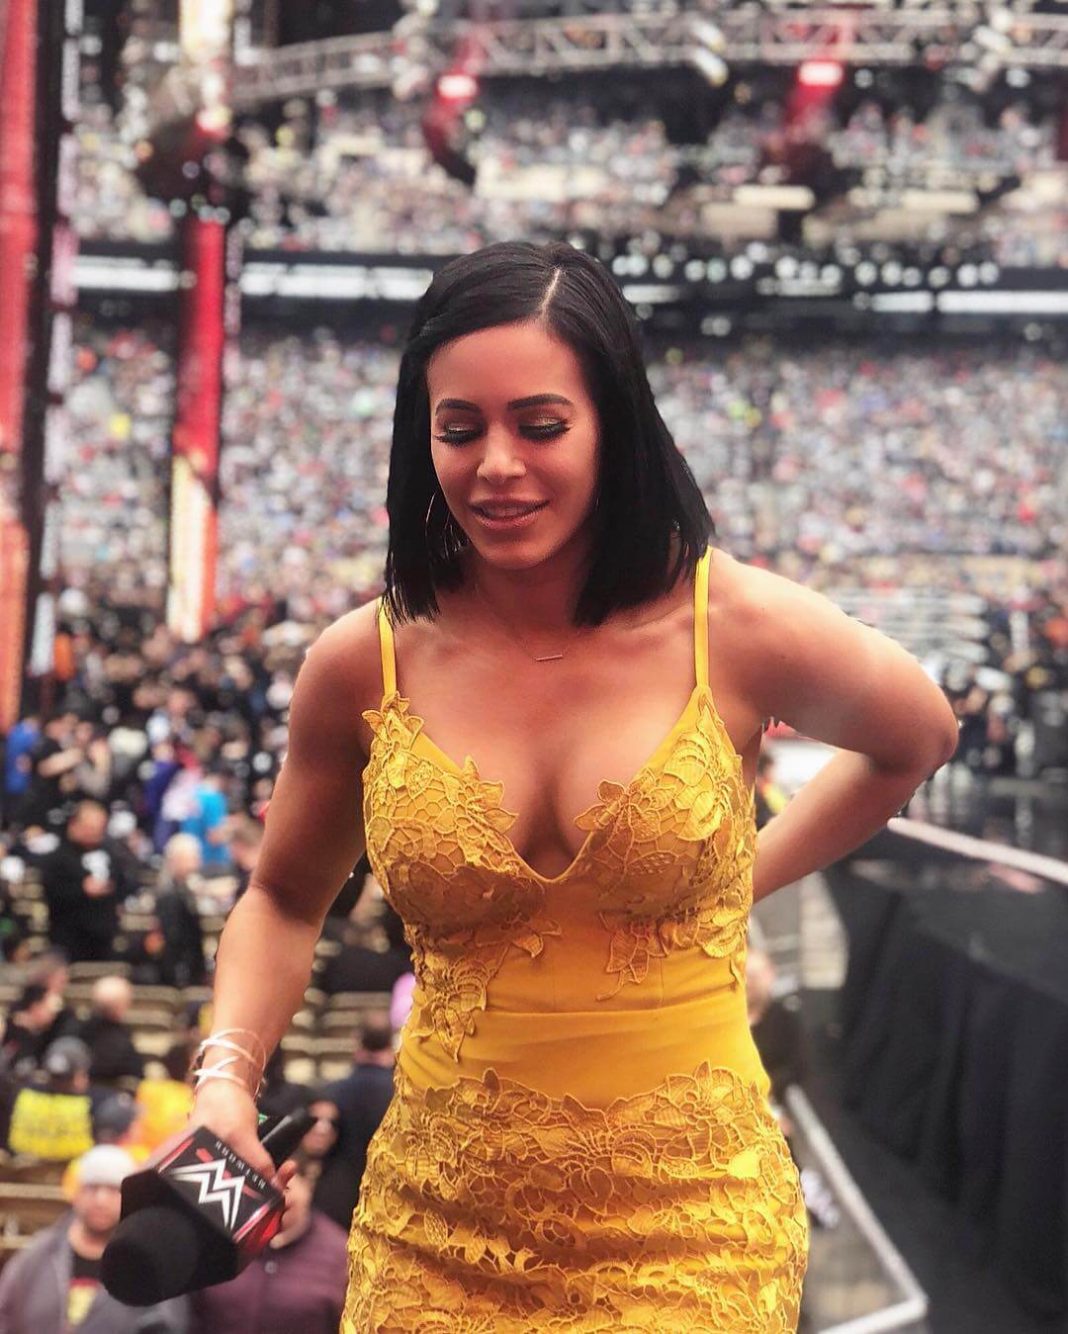 51 Charly Caruso Nude Pictures Are Hard To Not Notice Her Beauty 21. 